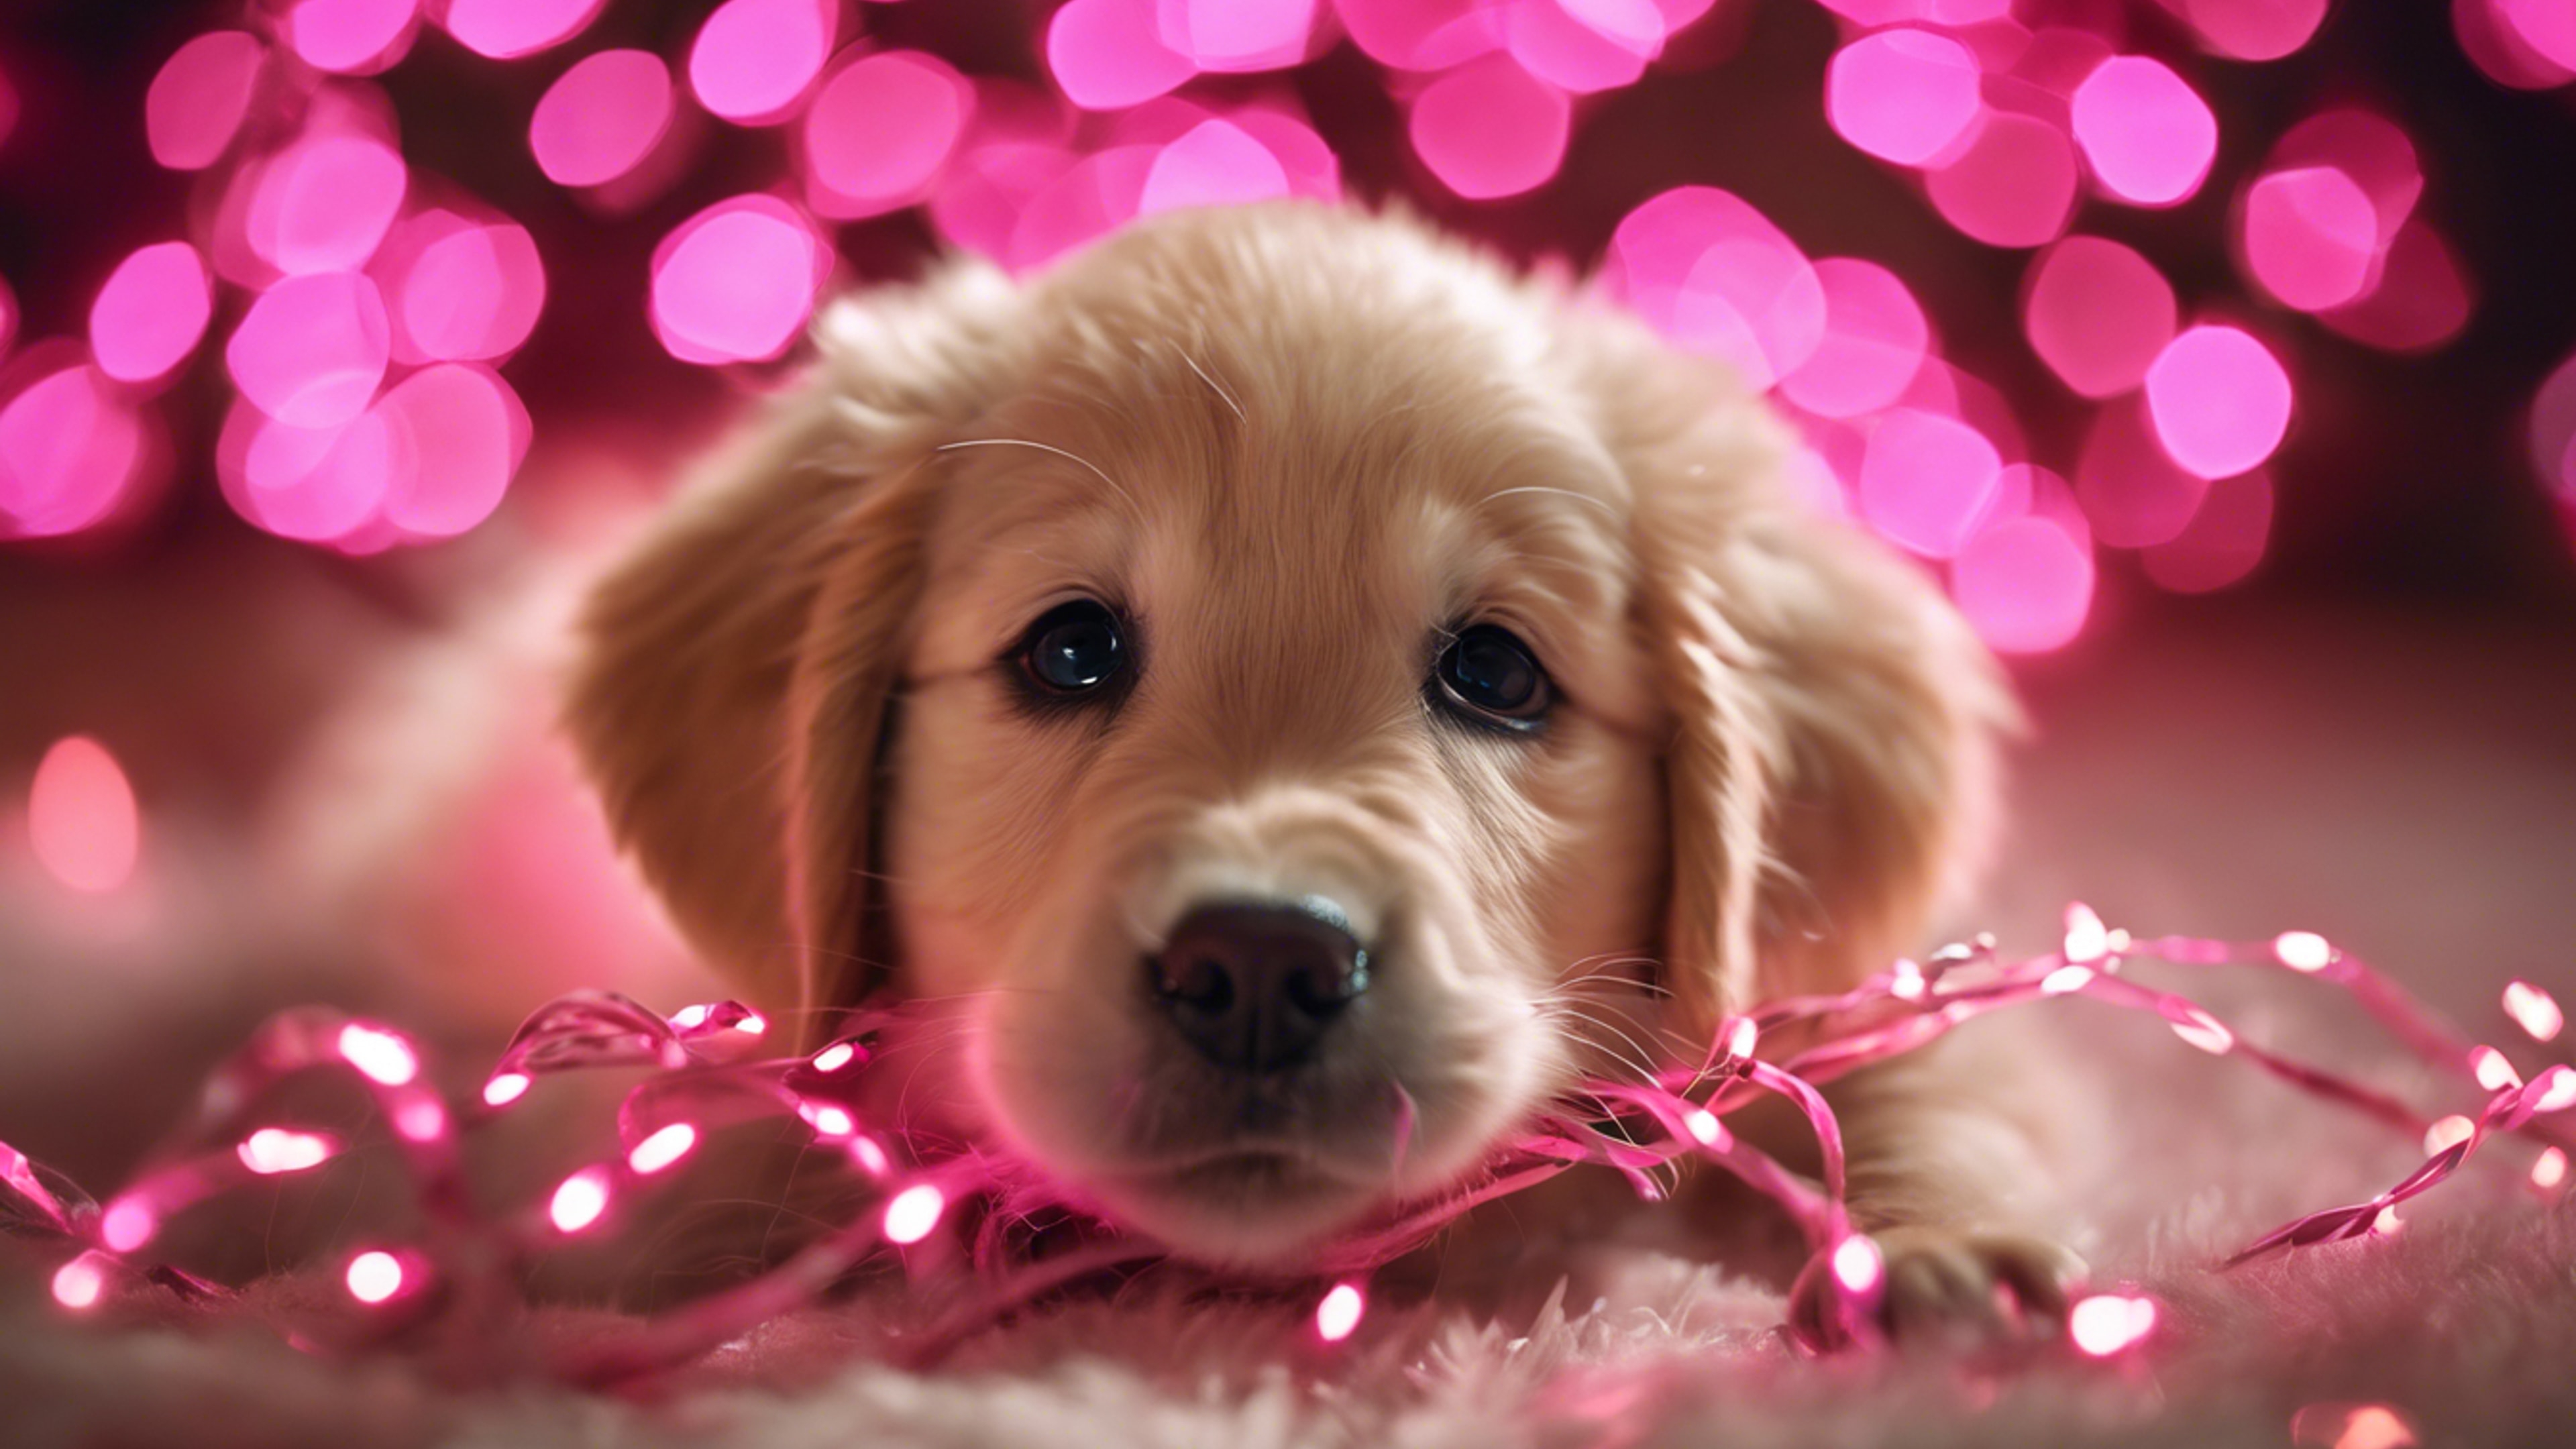 A golden retriever puppy adorably tangled in pink Christmas lights.壁紙[26994d3815c0460ab11e]